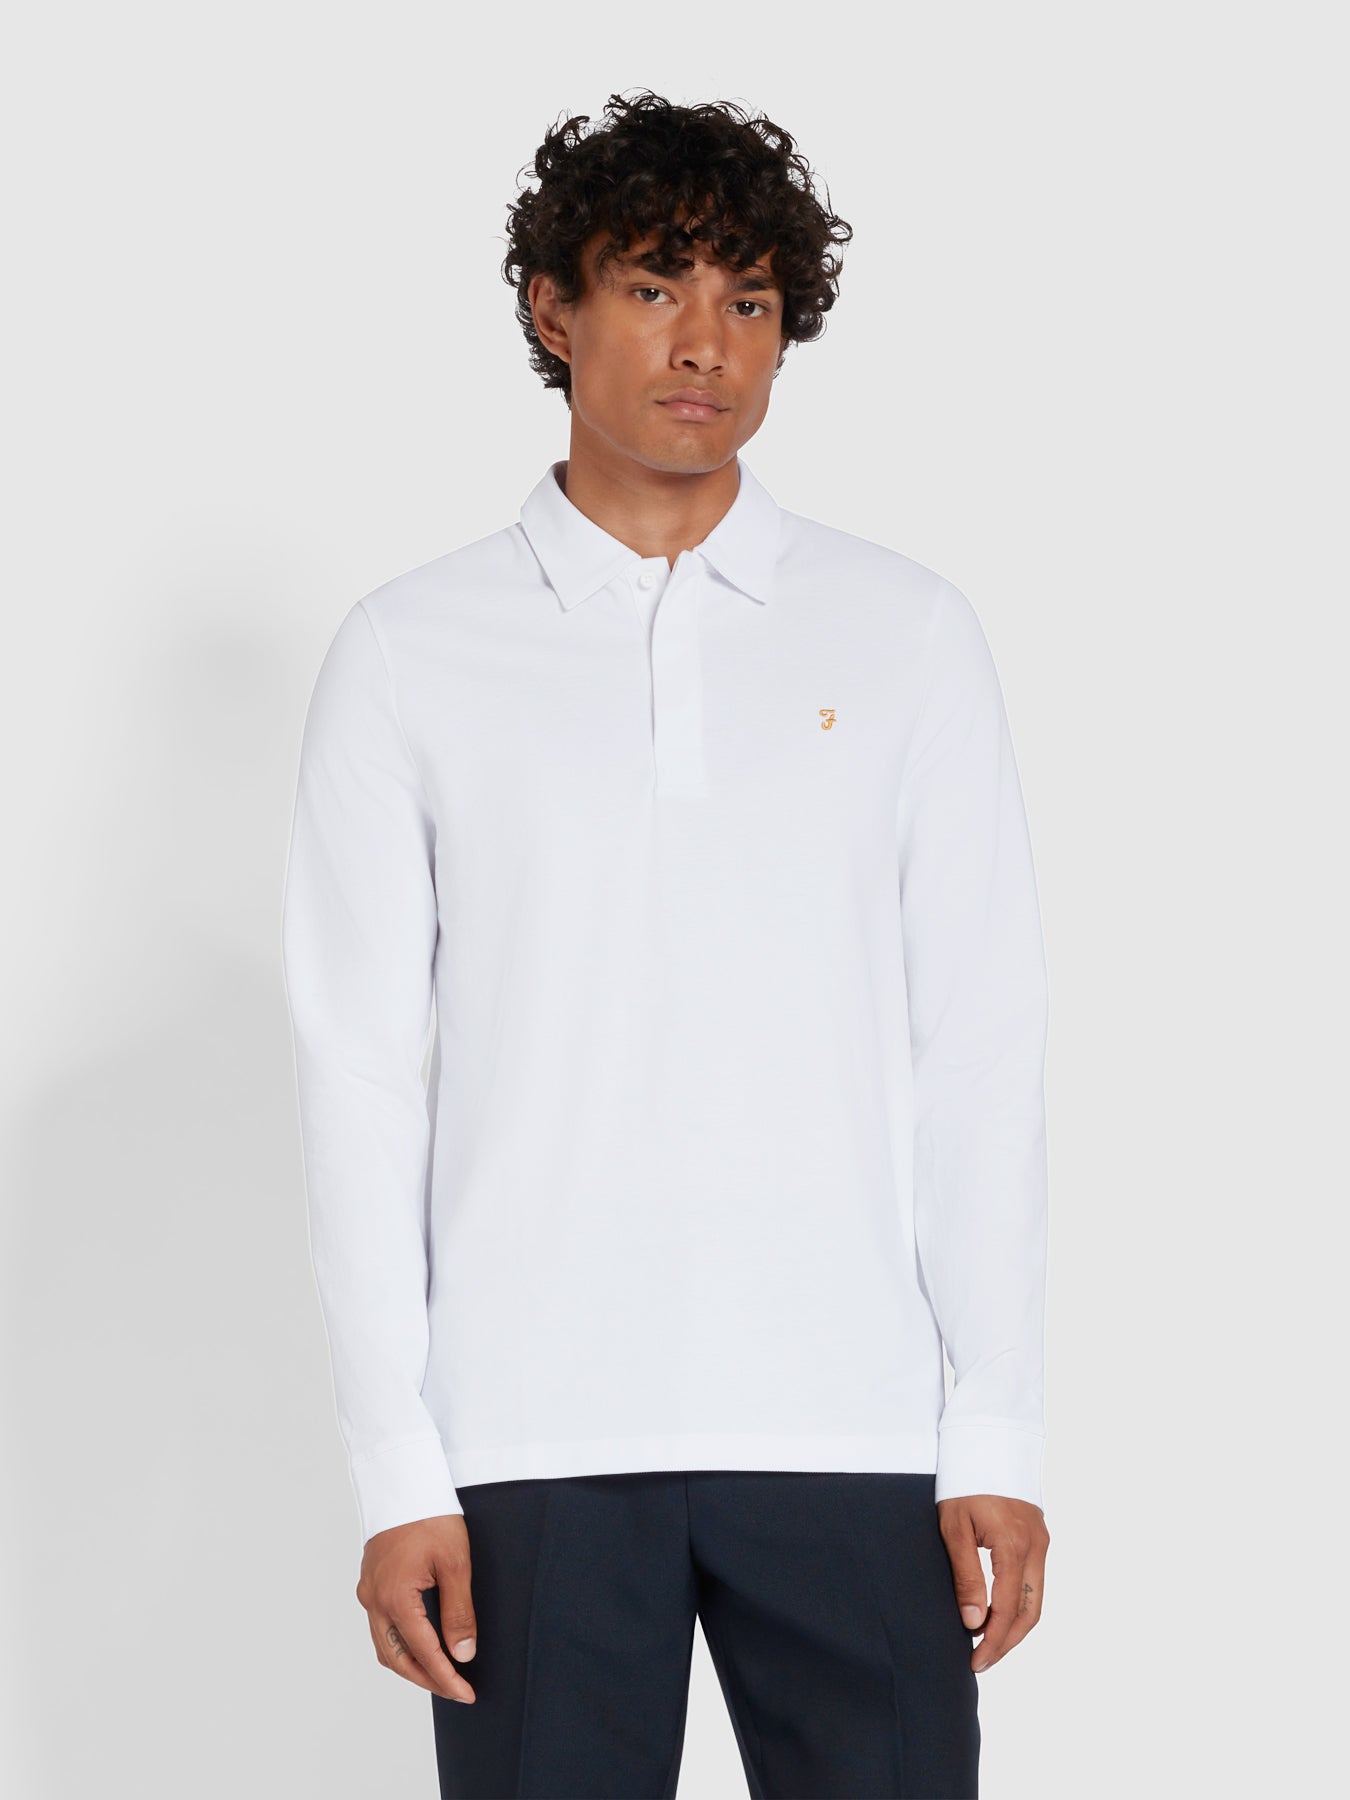 View Haslam Slim Fit Long Sleeve Organic Cotton Polo Shirt In White information